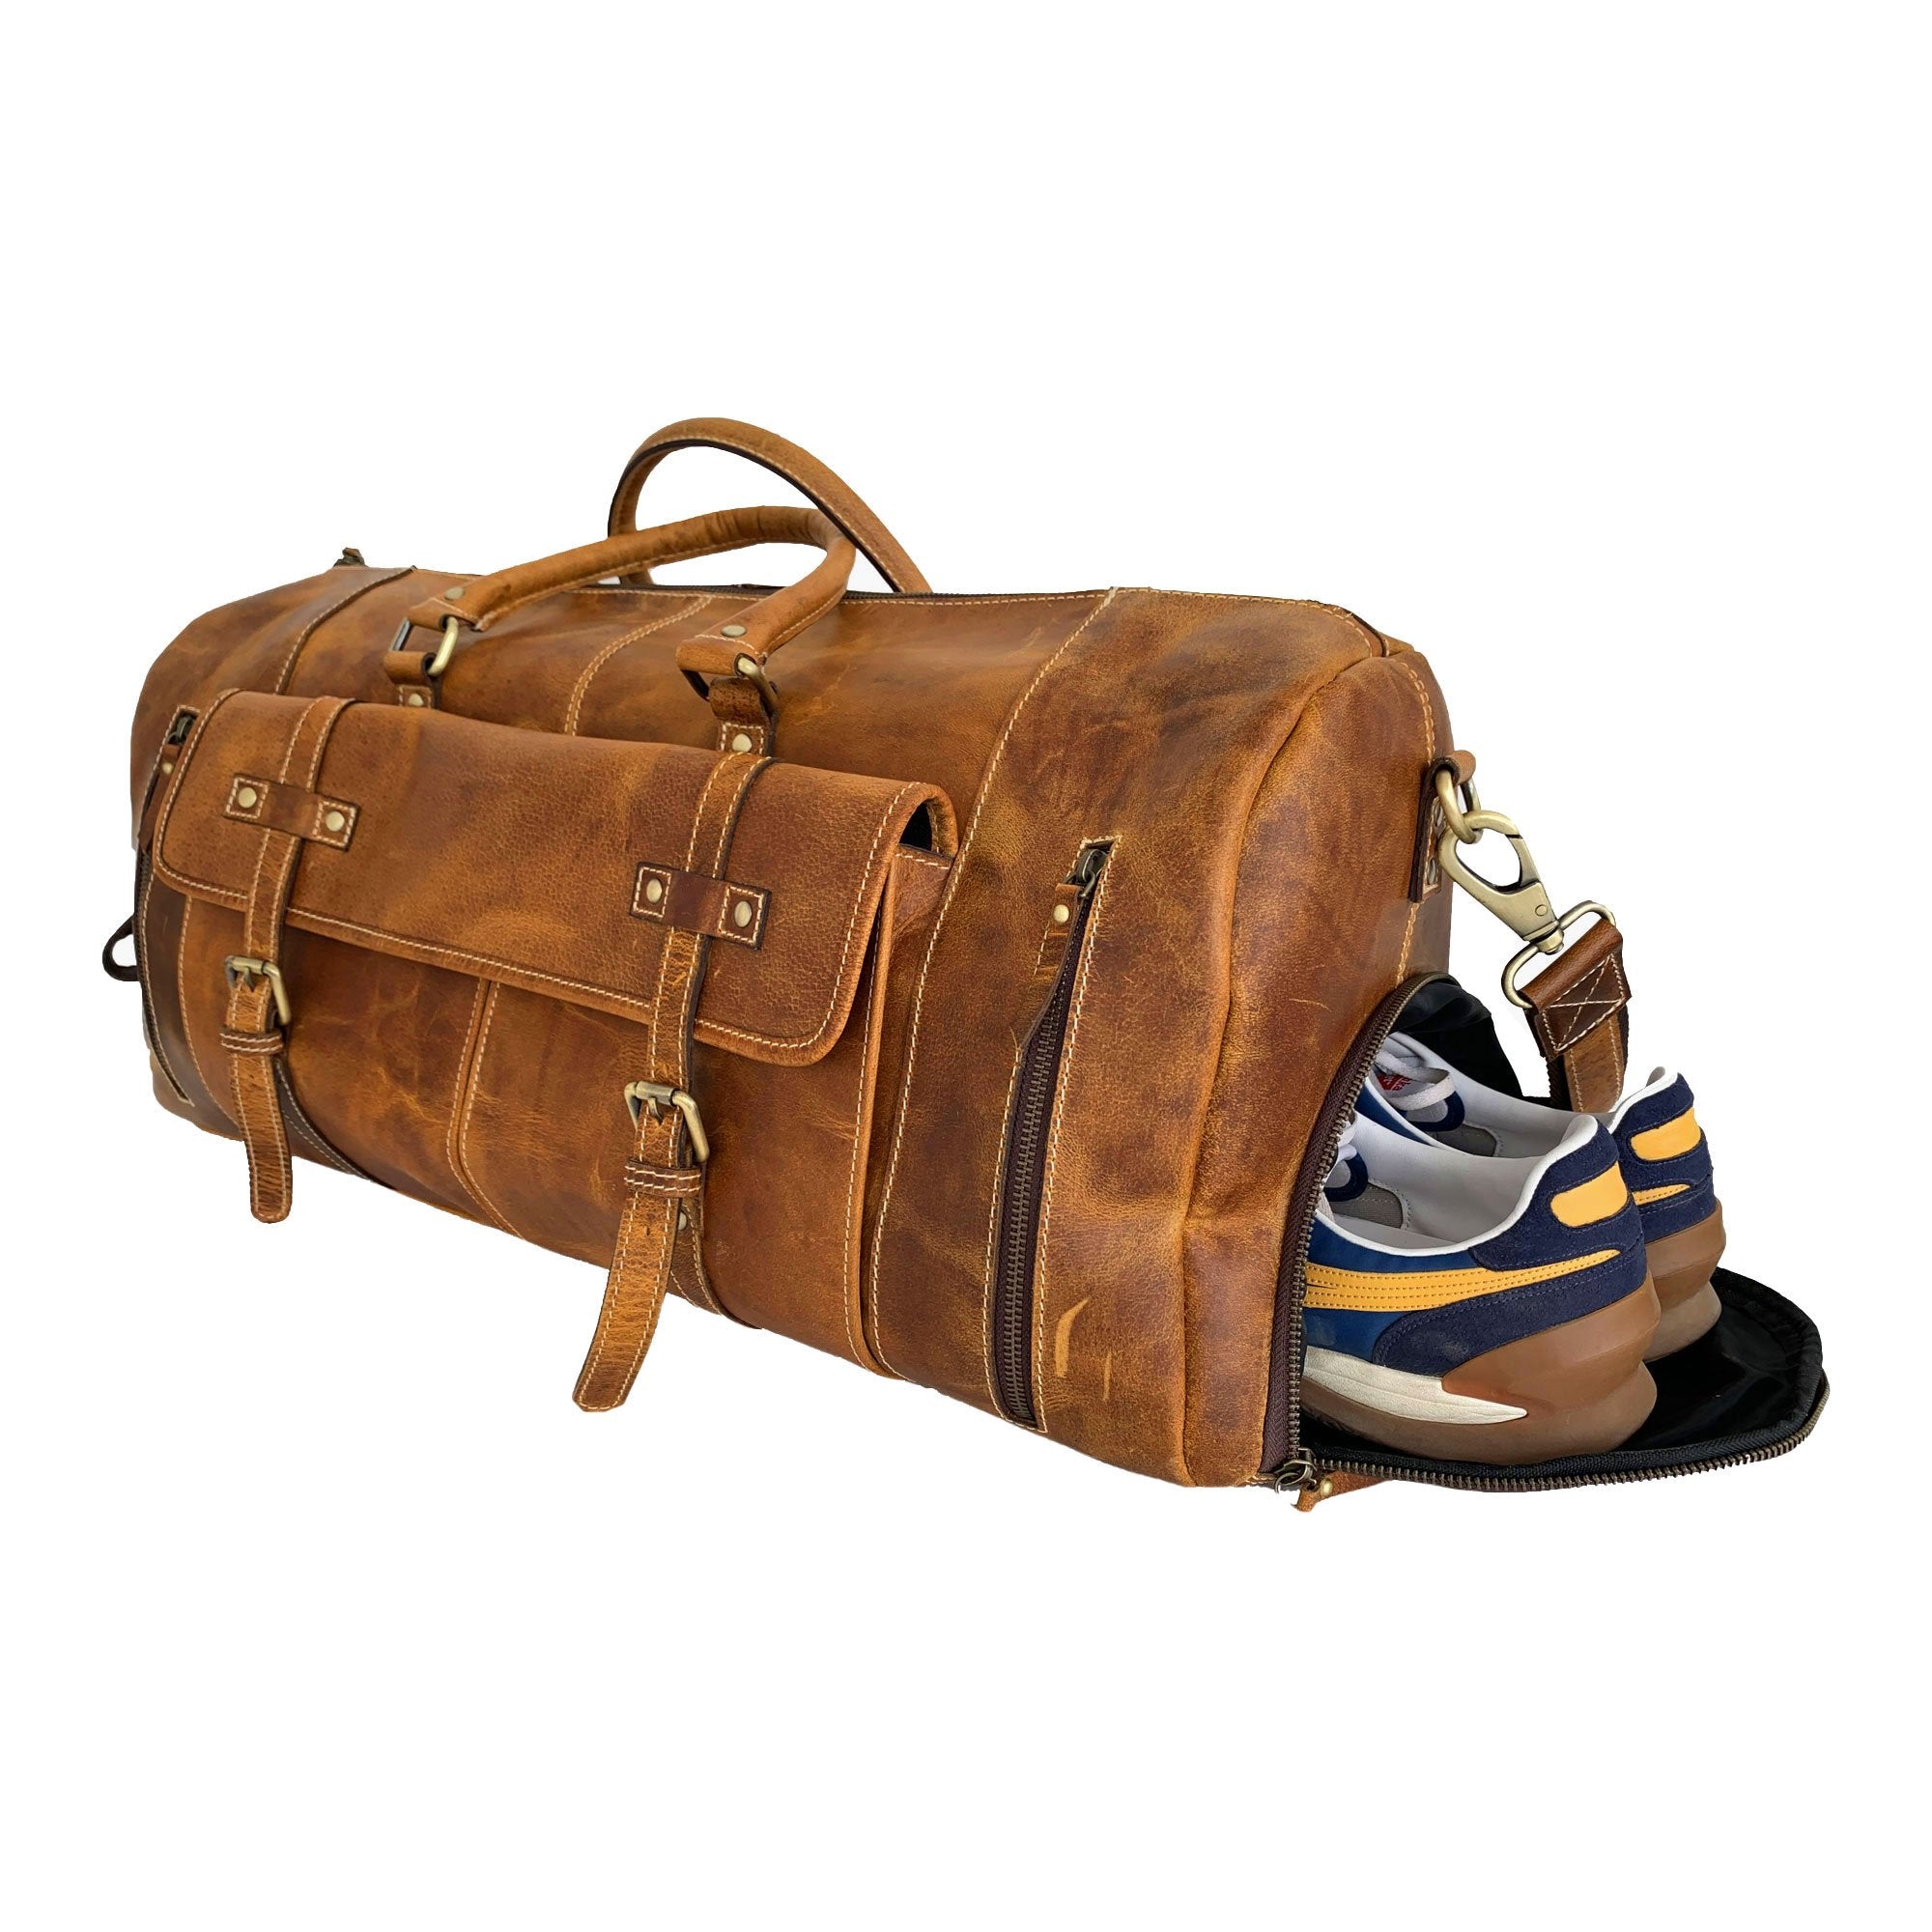 Komalc Leather Travel Duffle Bags for Men and Women Full Grain Leather Overnight Weekend Leather Bags Sports Gym Duffle. (Buffalo Distressed Tan)